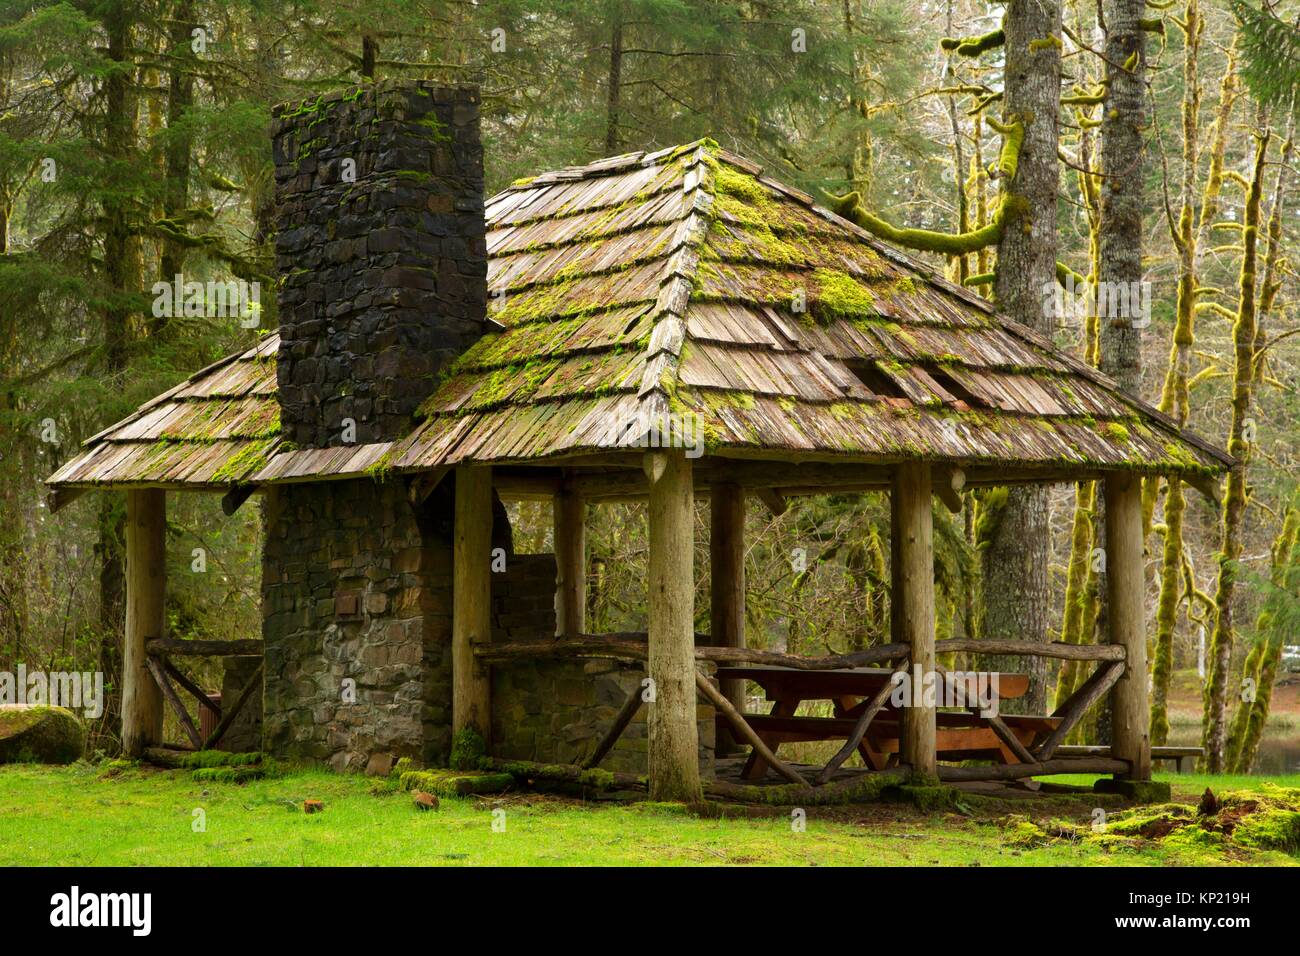 CCC (Civilian Conservation Corps) picnic shelter at Hebo Lake, Siuslaw National Forest, Oregon. Stock Photo